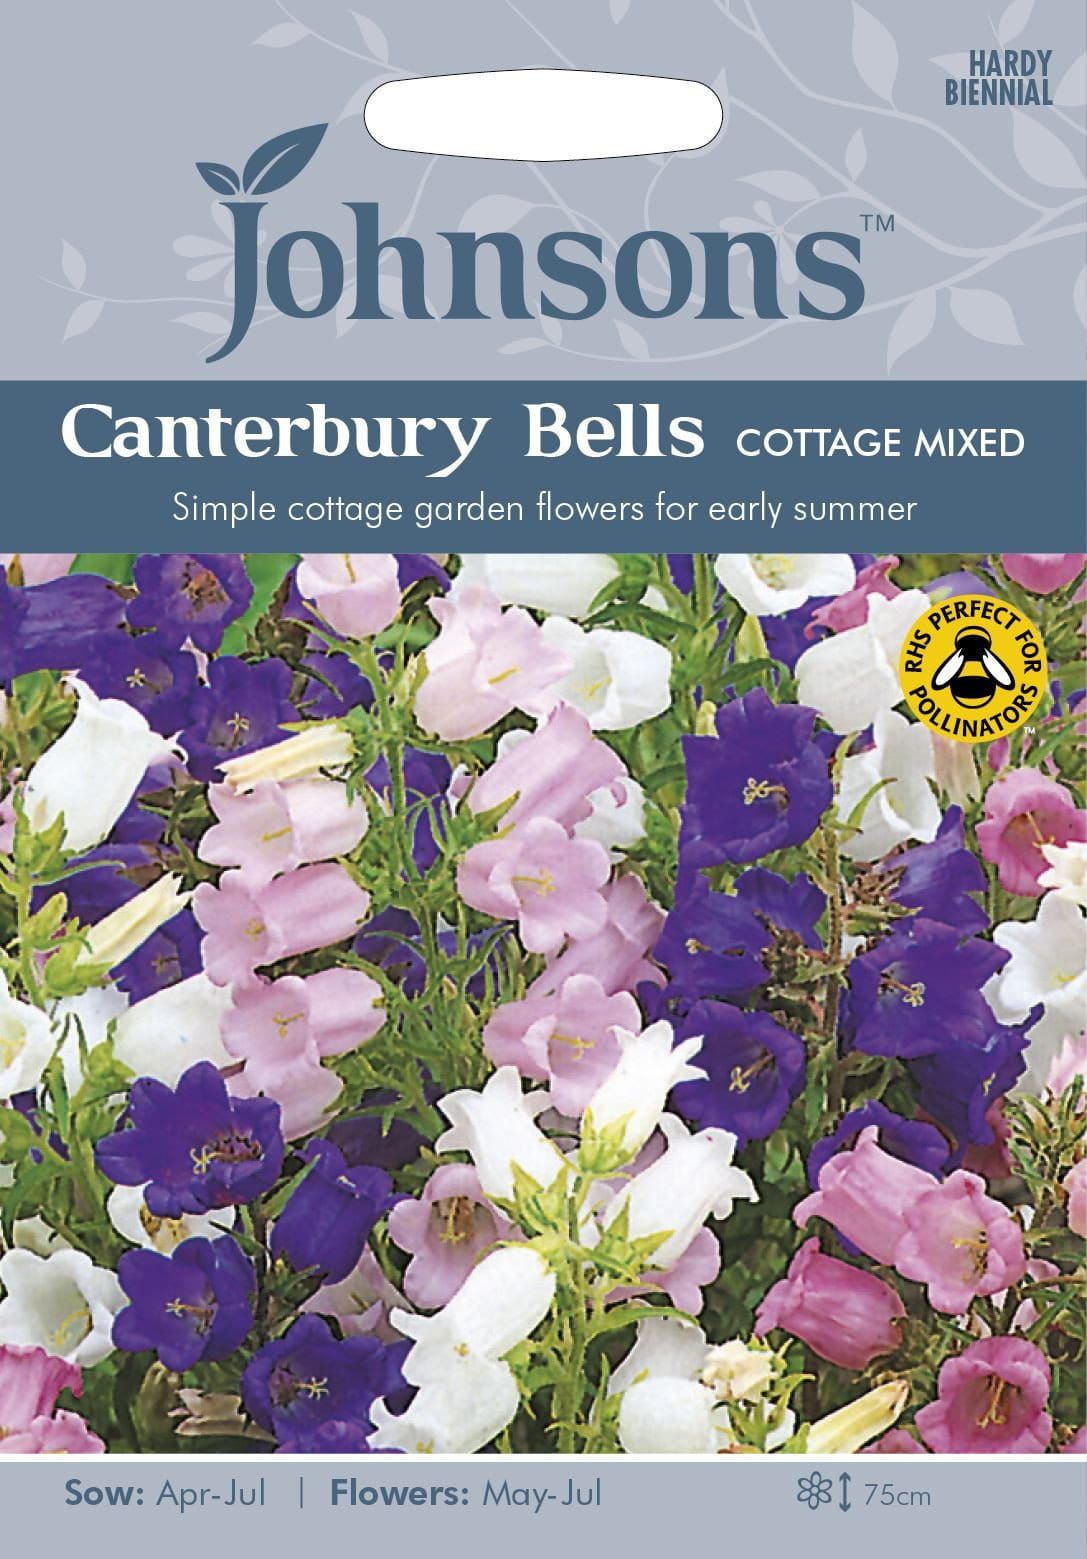 Johnsons Canterbury Bells Cottage Mixed 600 Seeds